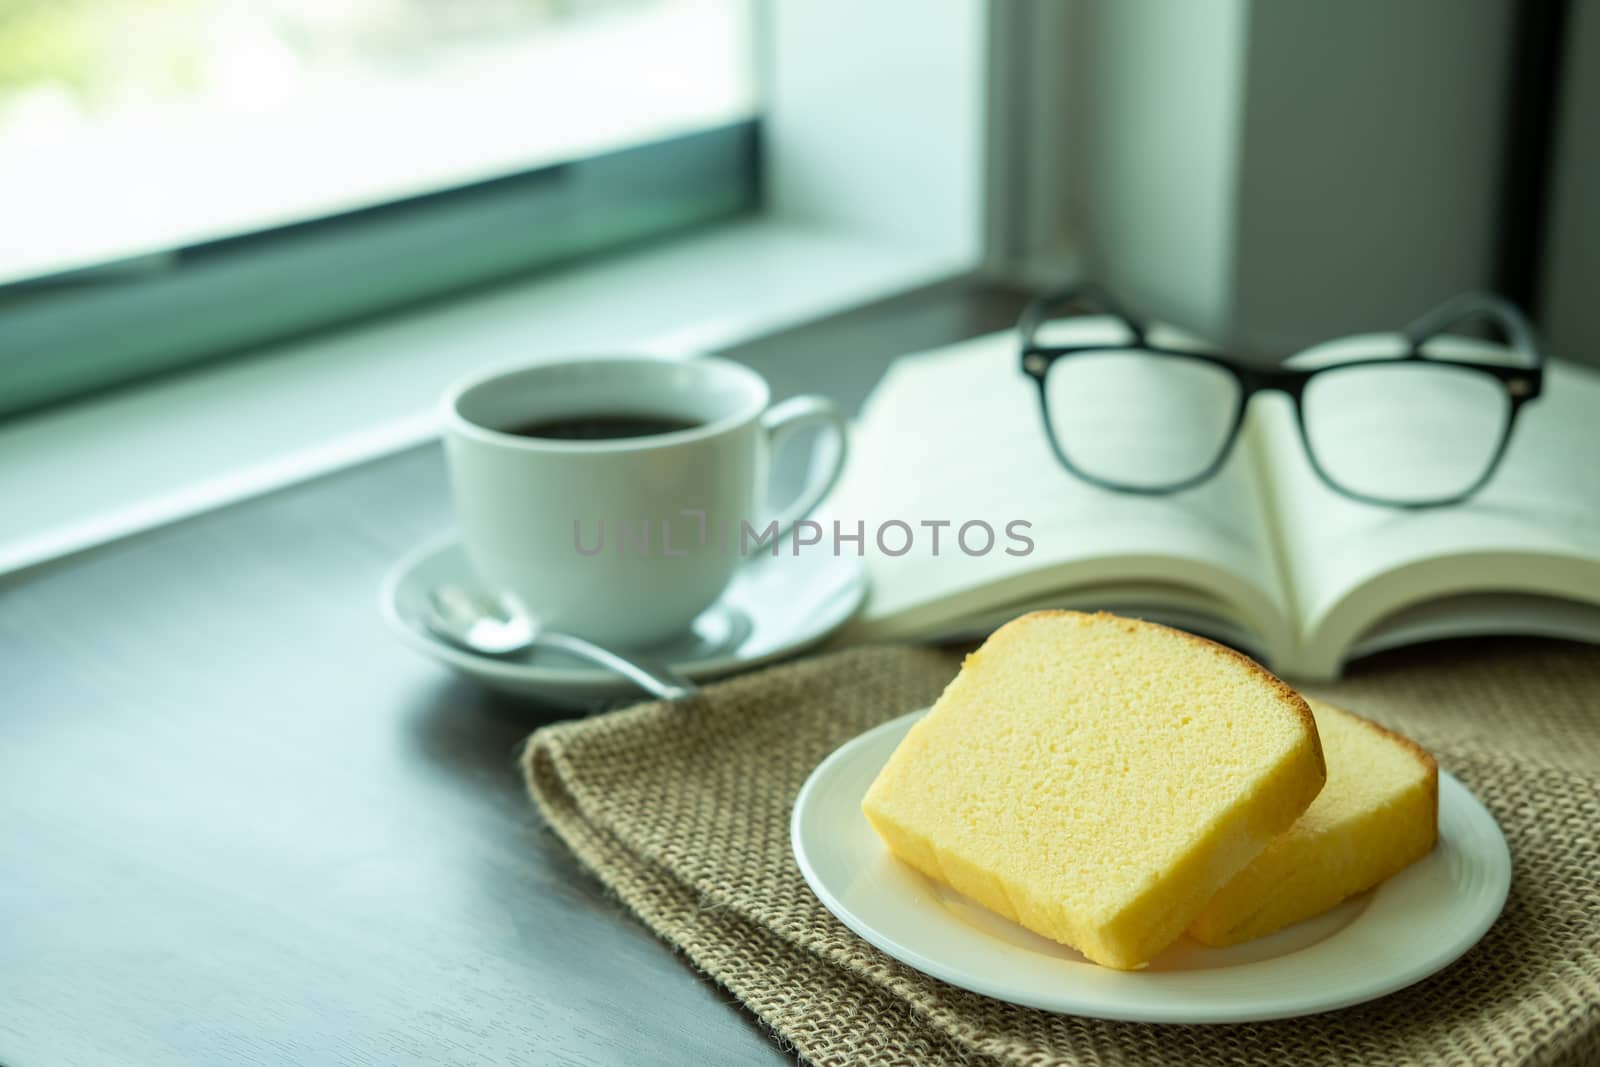 Snacks in the morning break. There are butter cakes, coffee on the table next to the window of the weekend by Toefotostock